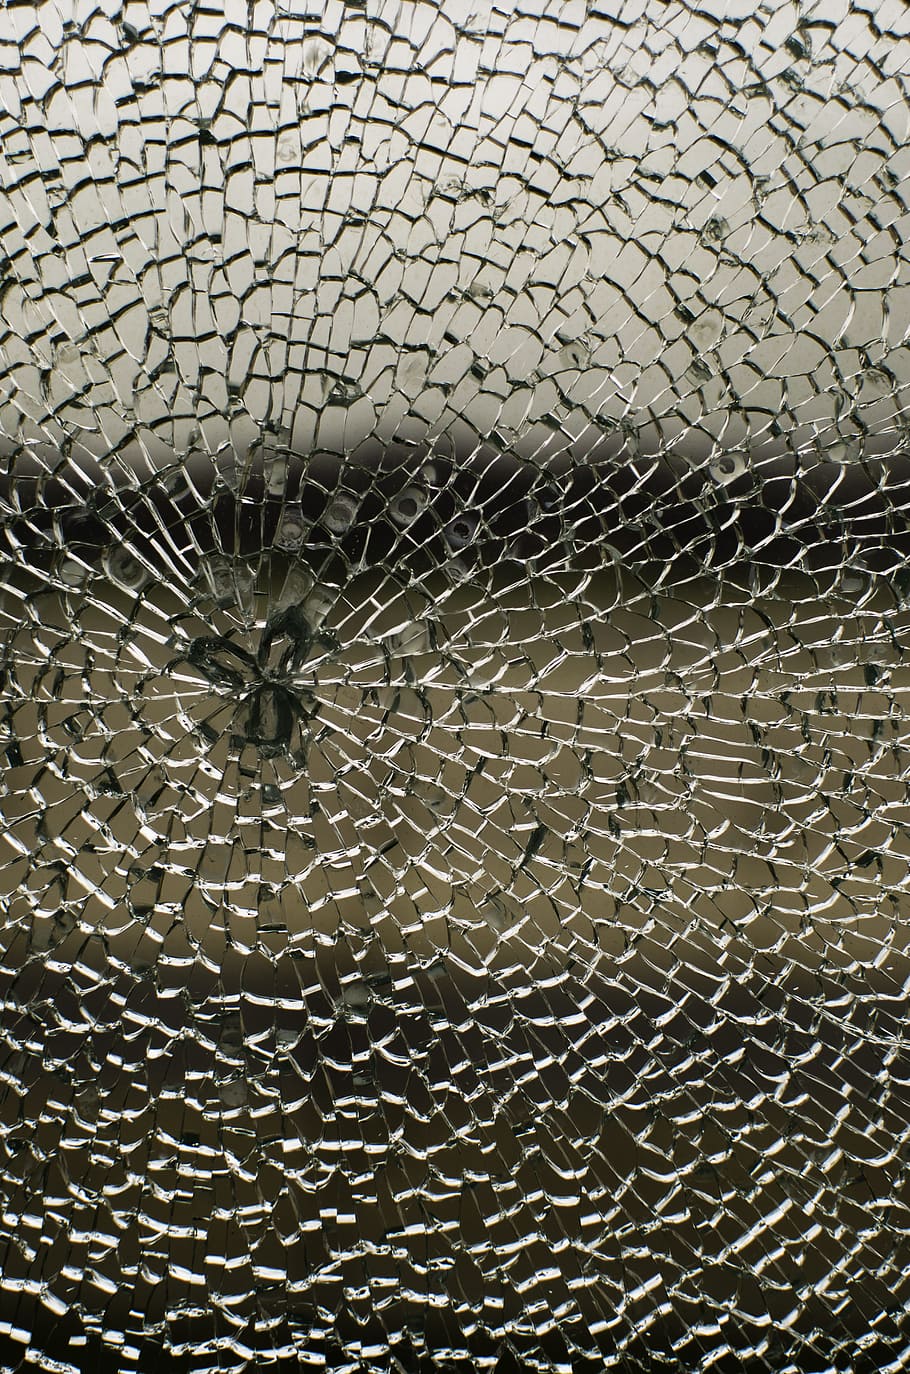 cracked glass, pane, bruise, the destruction of the, crack, the breakdown of the, pieces, pattern, invertebrate, full frame